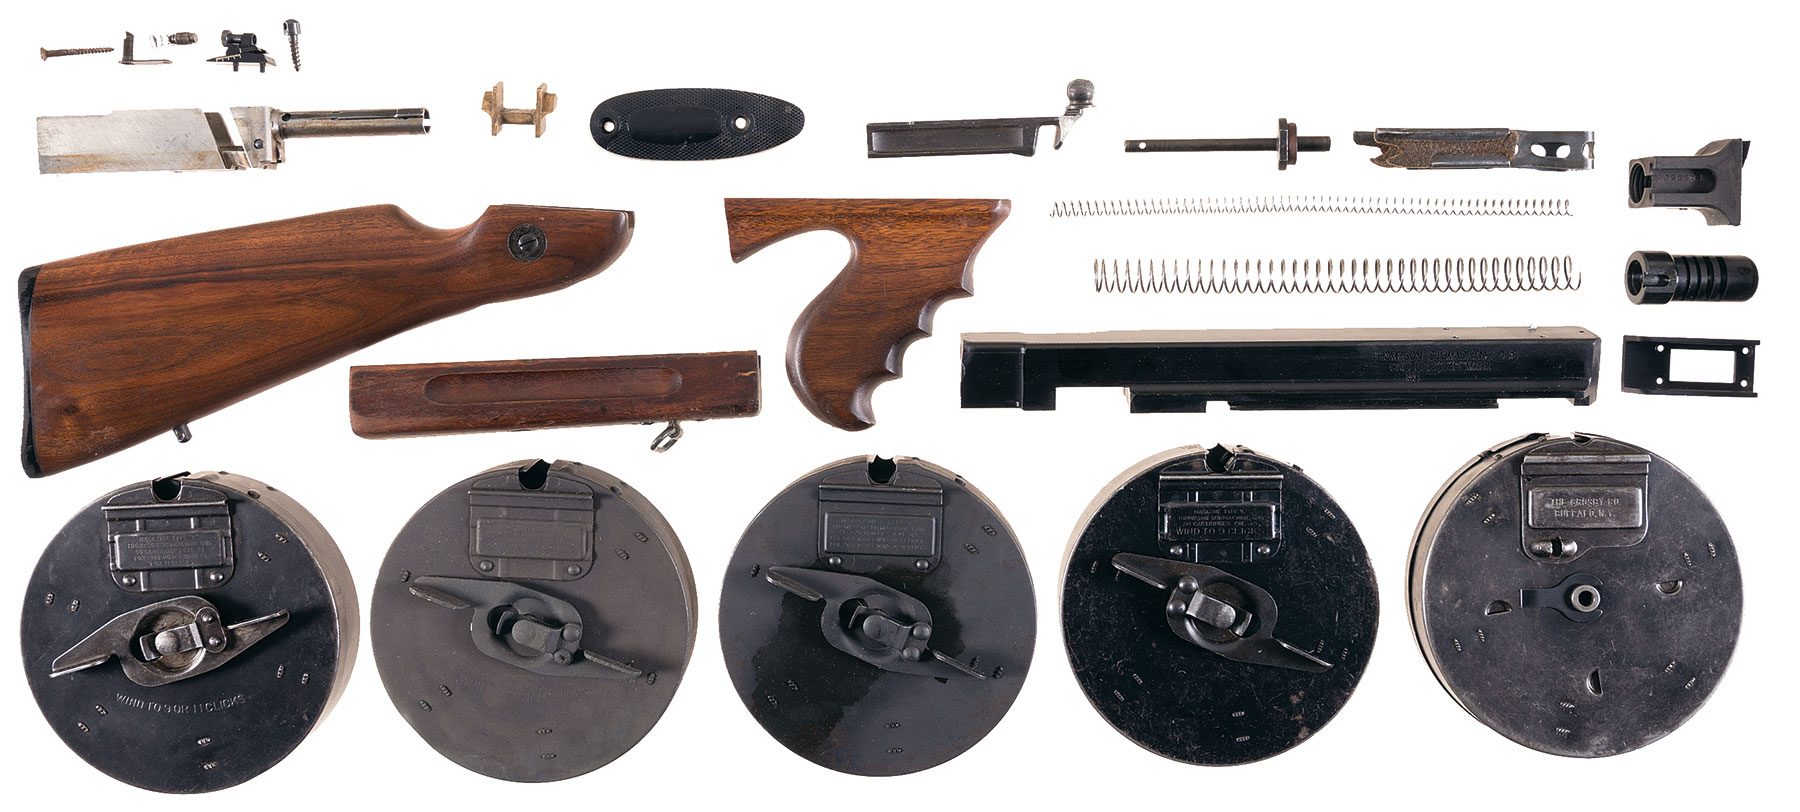 Thompson SMG Parts, Including 5 Fifty-Round Drum Magazine - All five drums ...